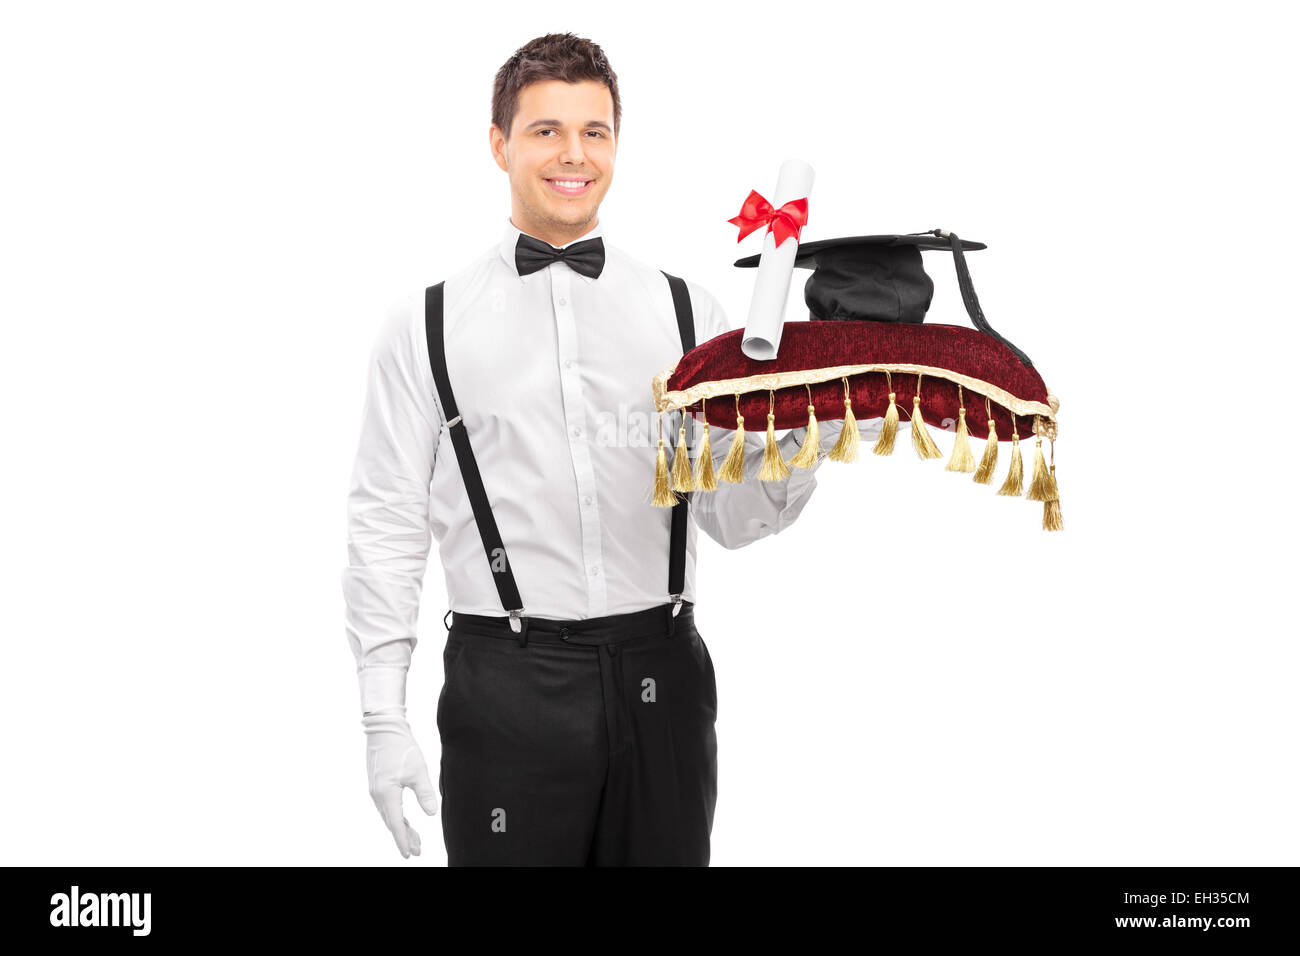 Male butler holding a diploma and a mortarboard on a red pillow isolated on white background Stock Photo